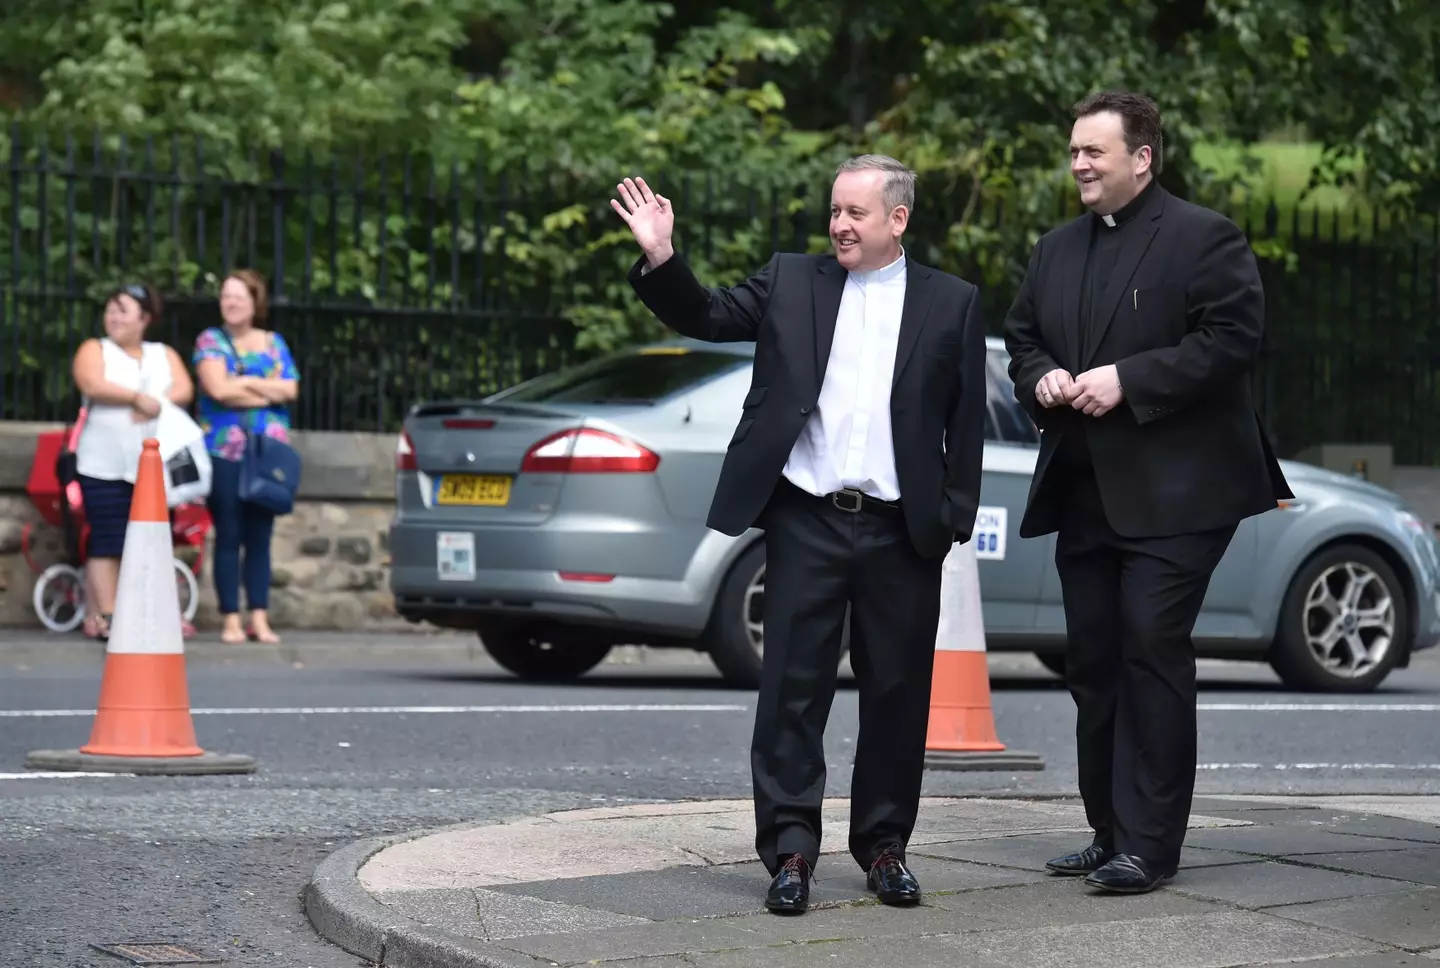 Dermott Donnelly celebrated the mass at the wedding of his brother Declan in 2015.